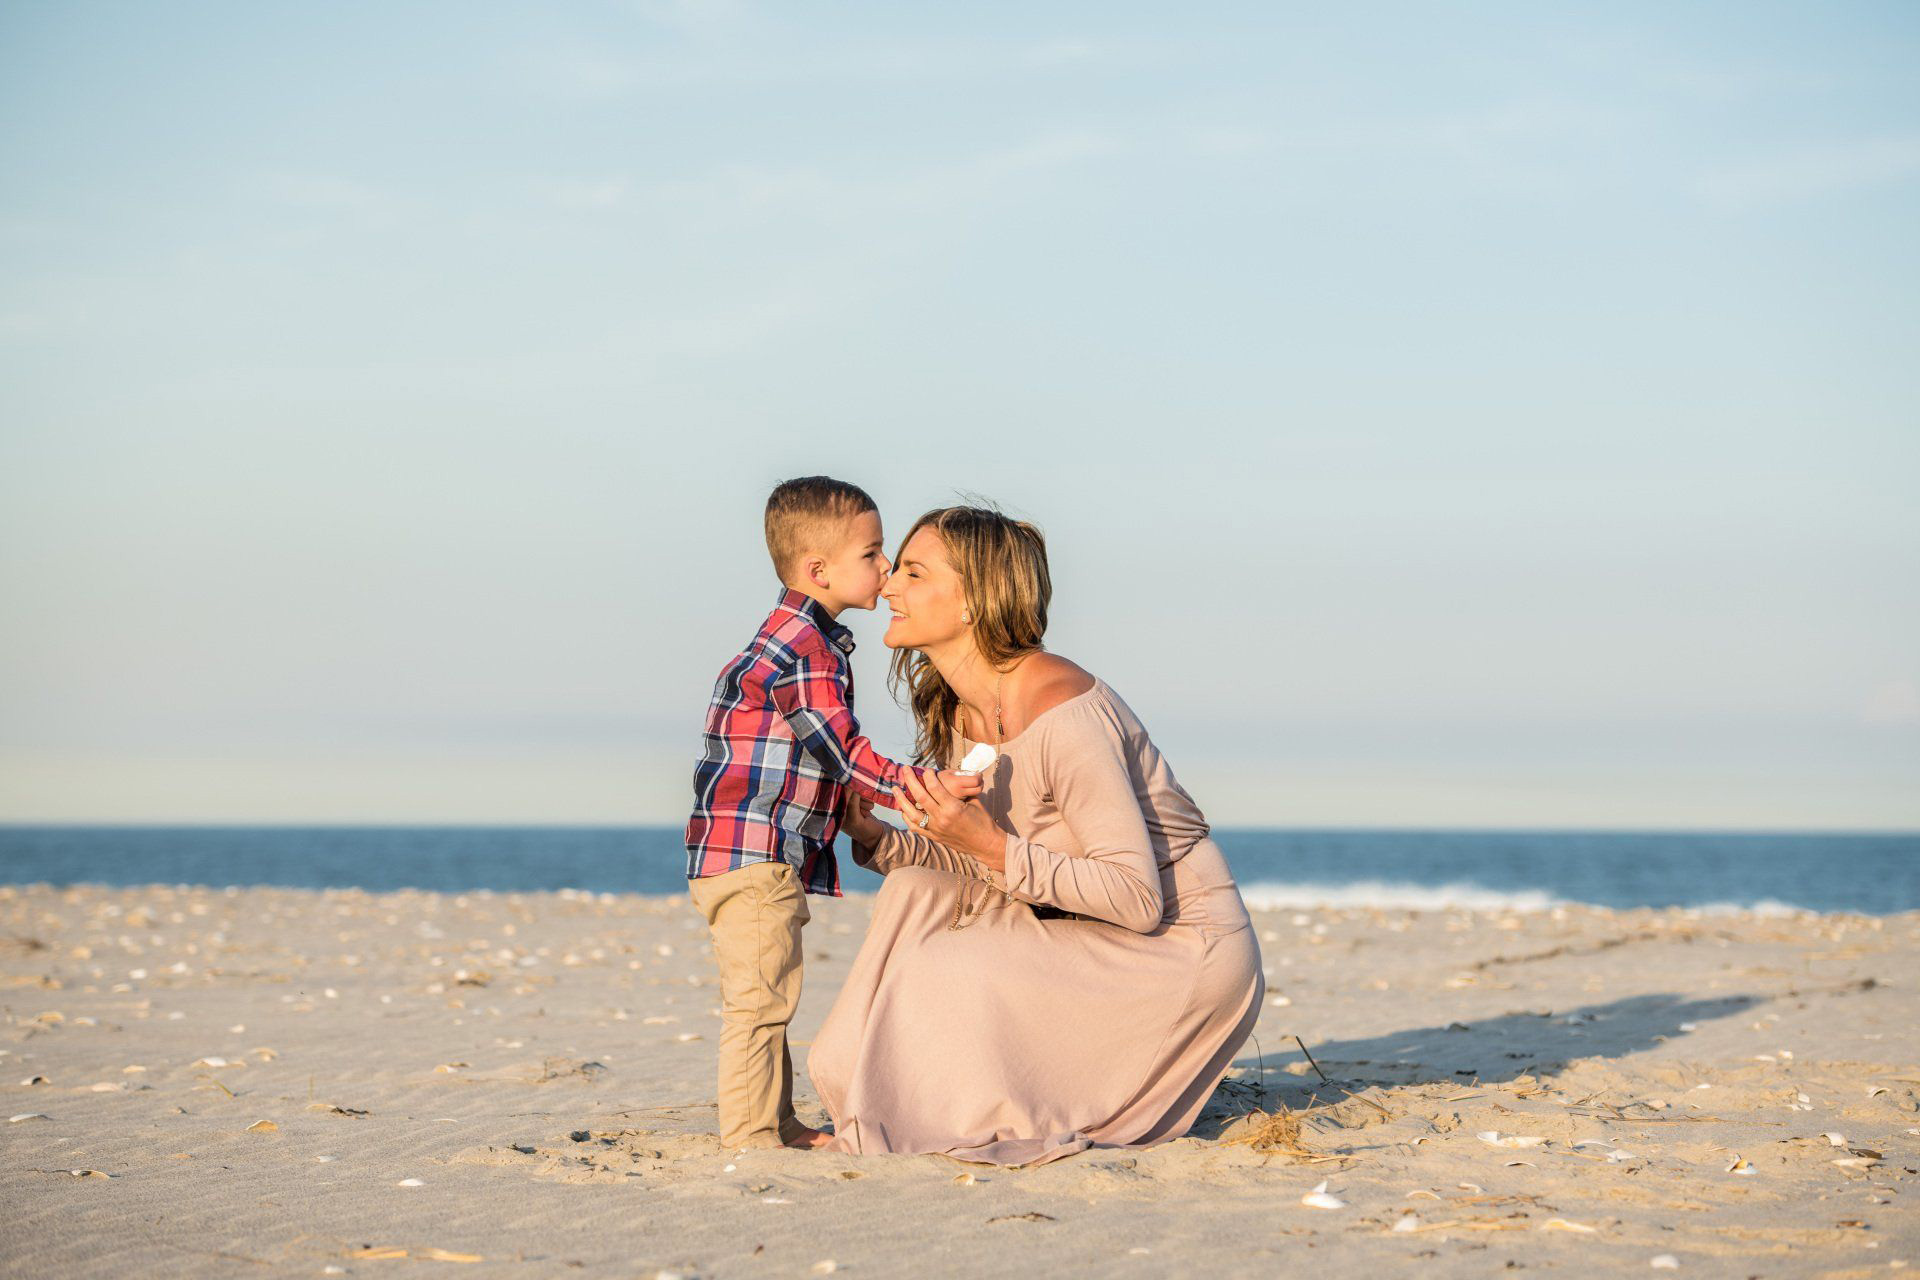 Dr. Kimberly and her young son on the beach.